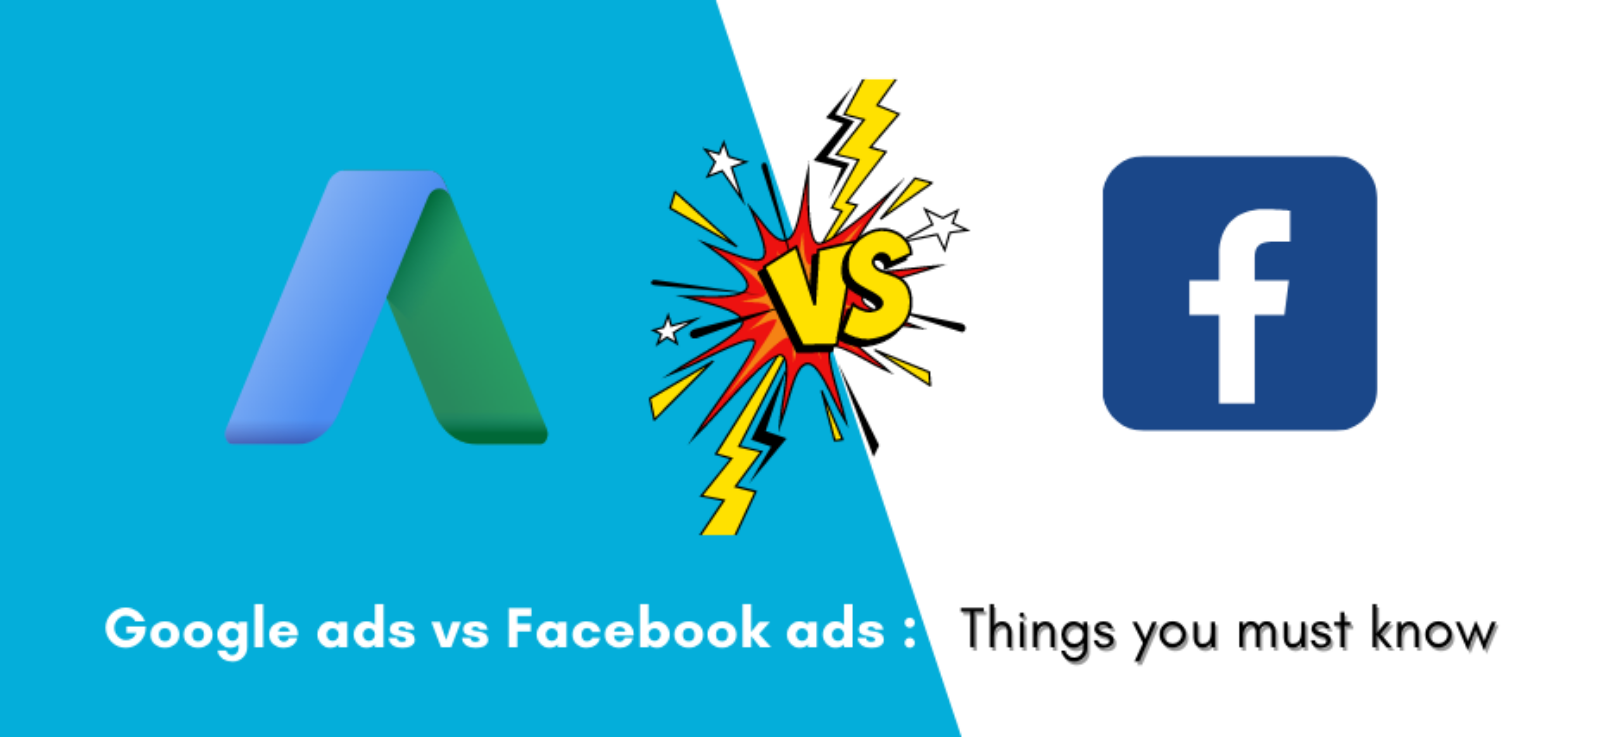 Google ads vs Facebook ads things you must know